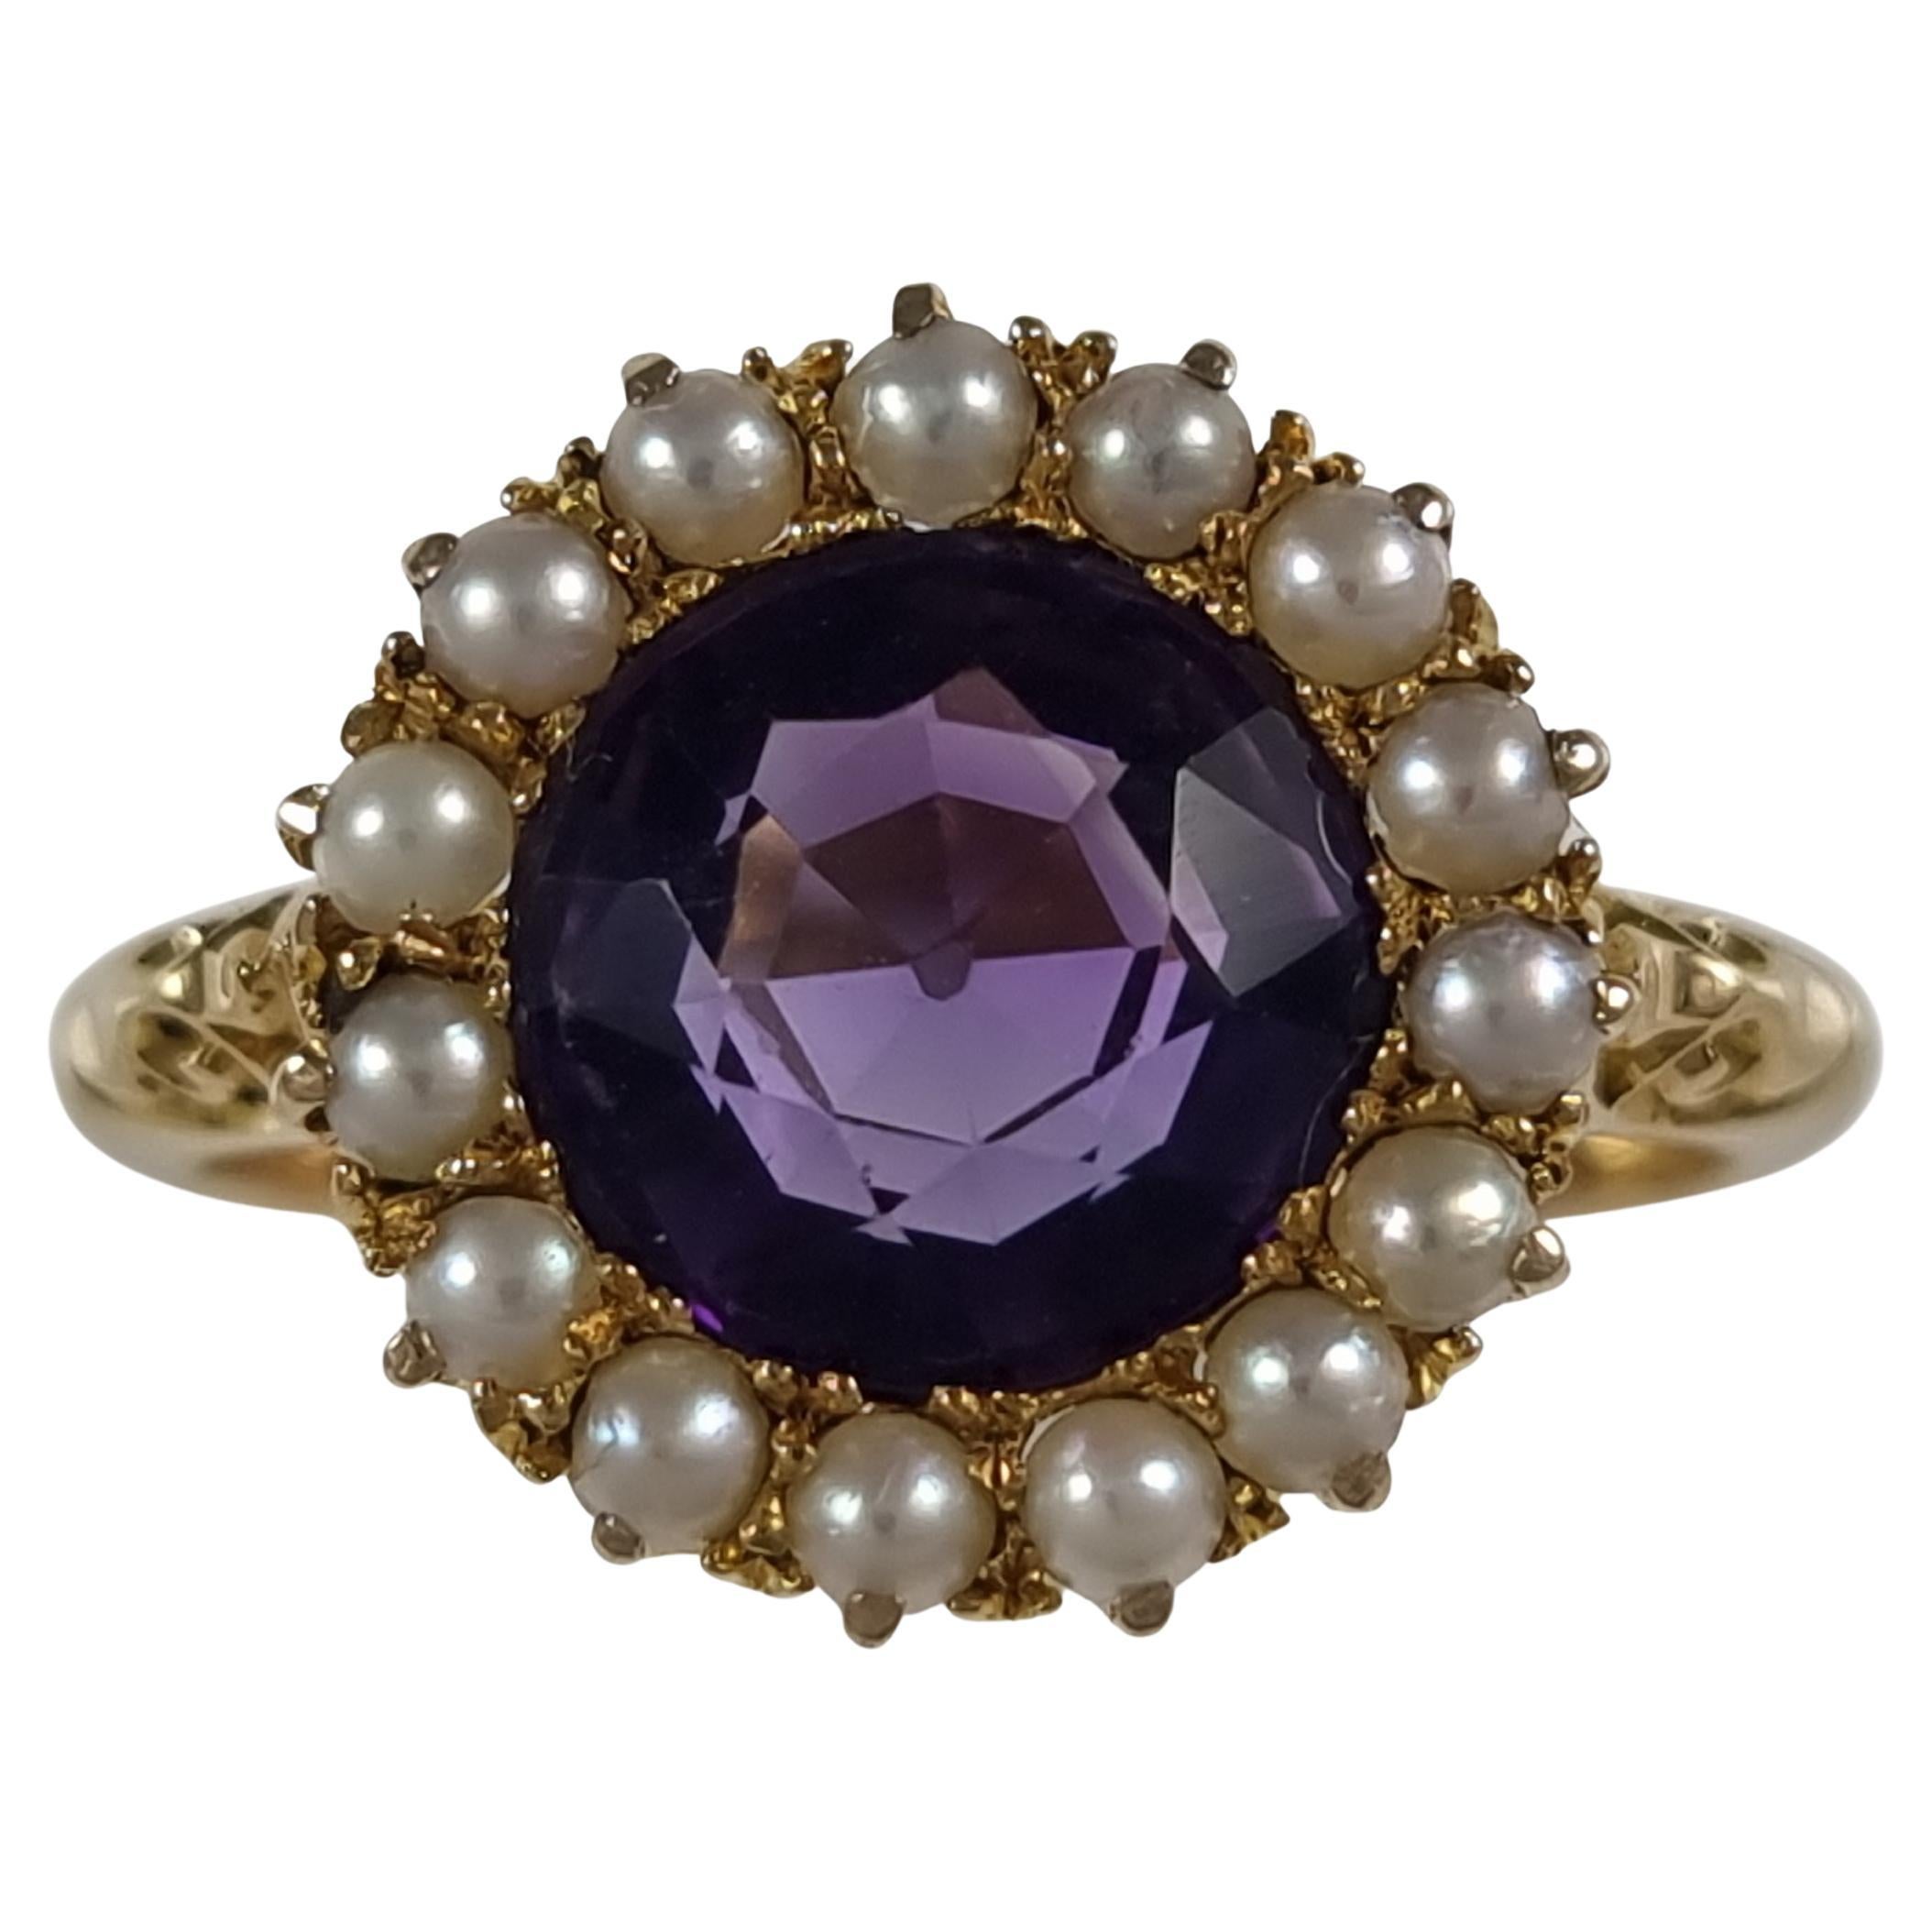 Edwardian 18 Carat Gold Amethyst and Pearl Cluster Ring, 1909